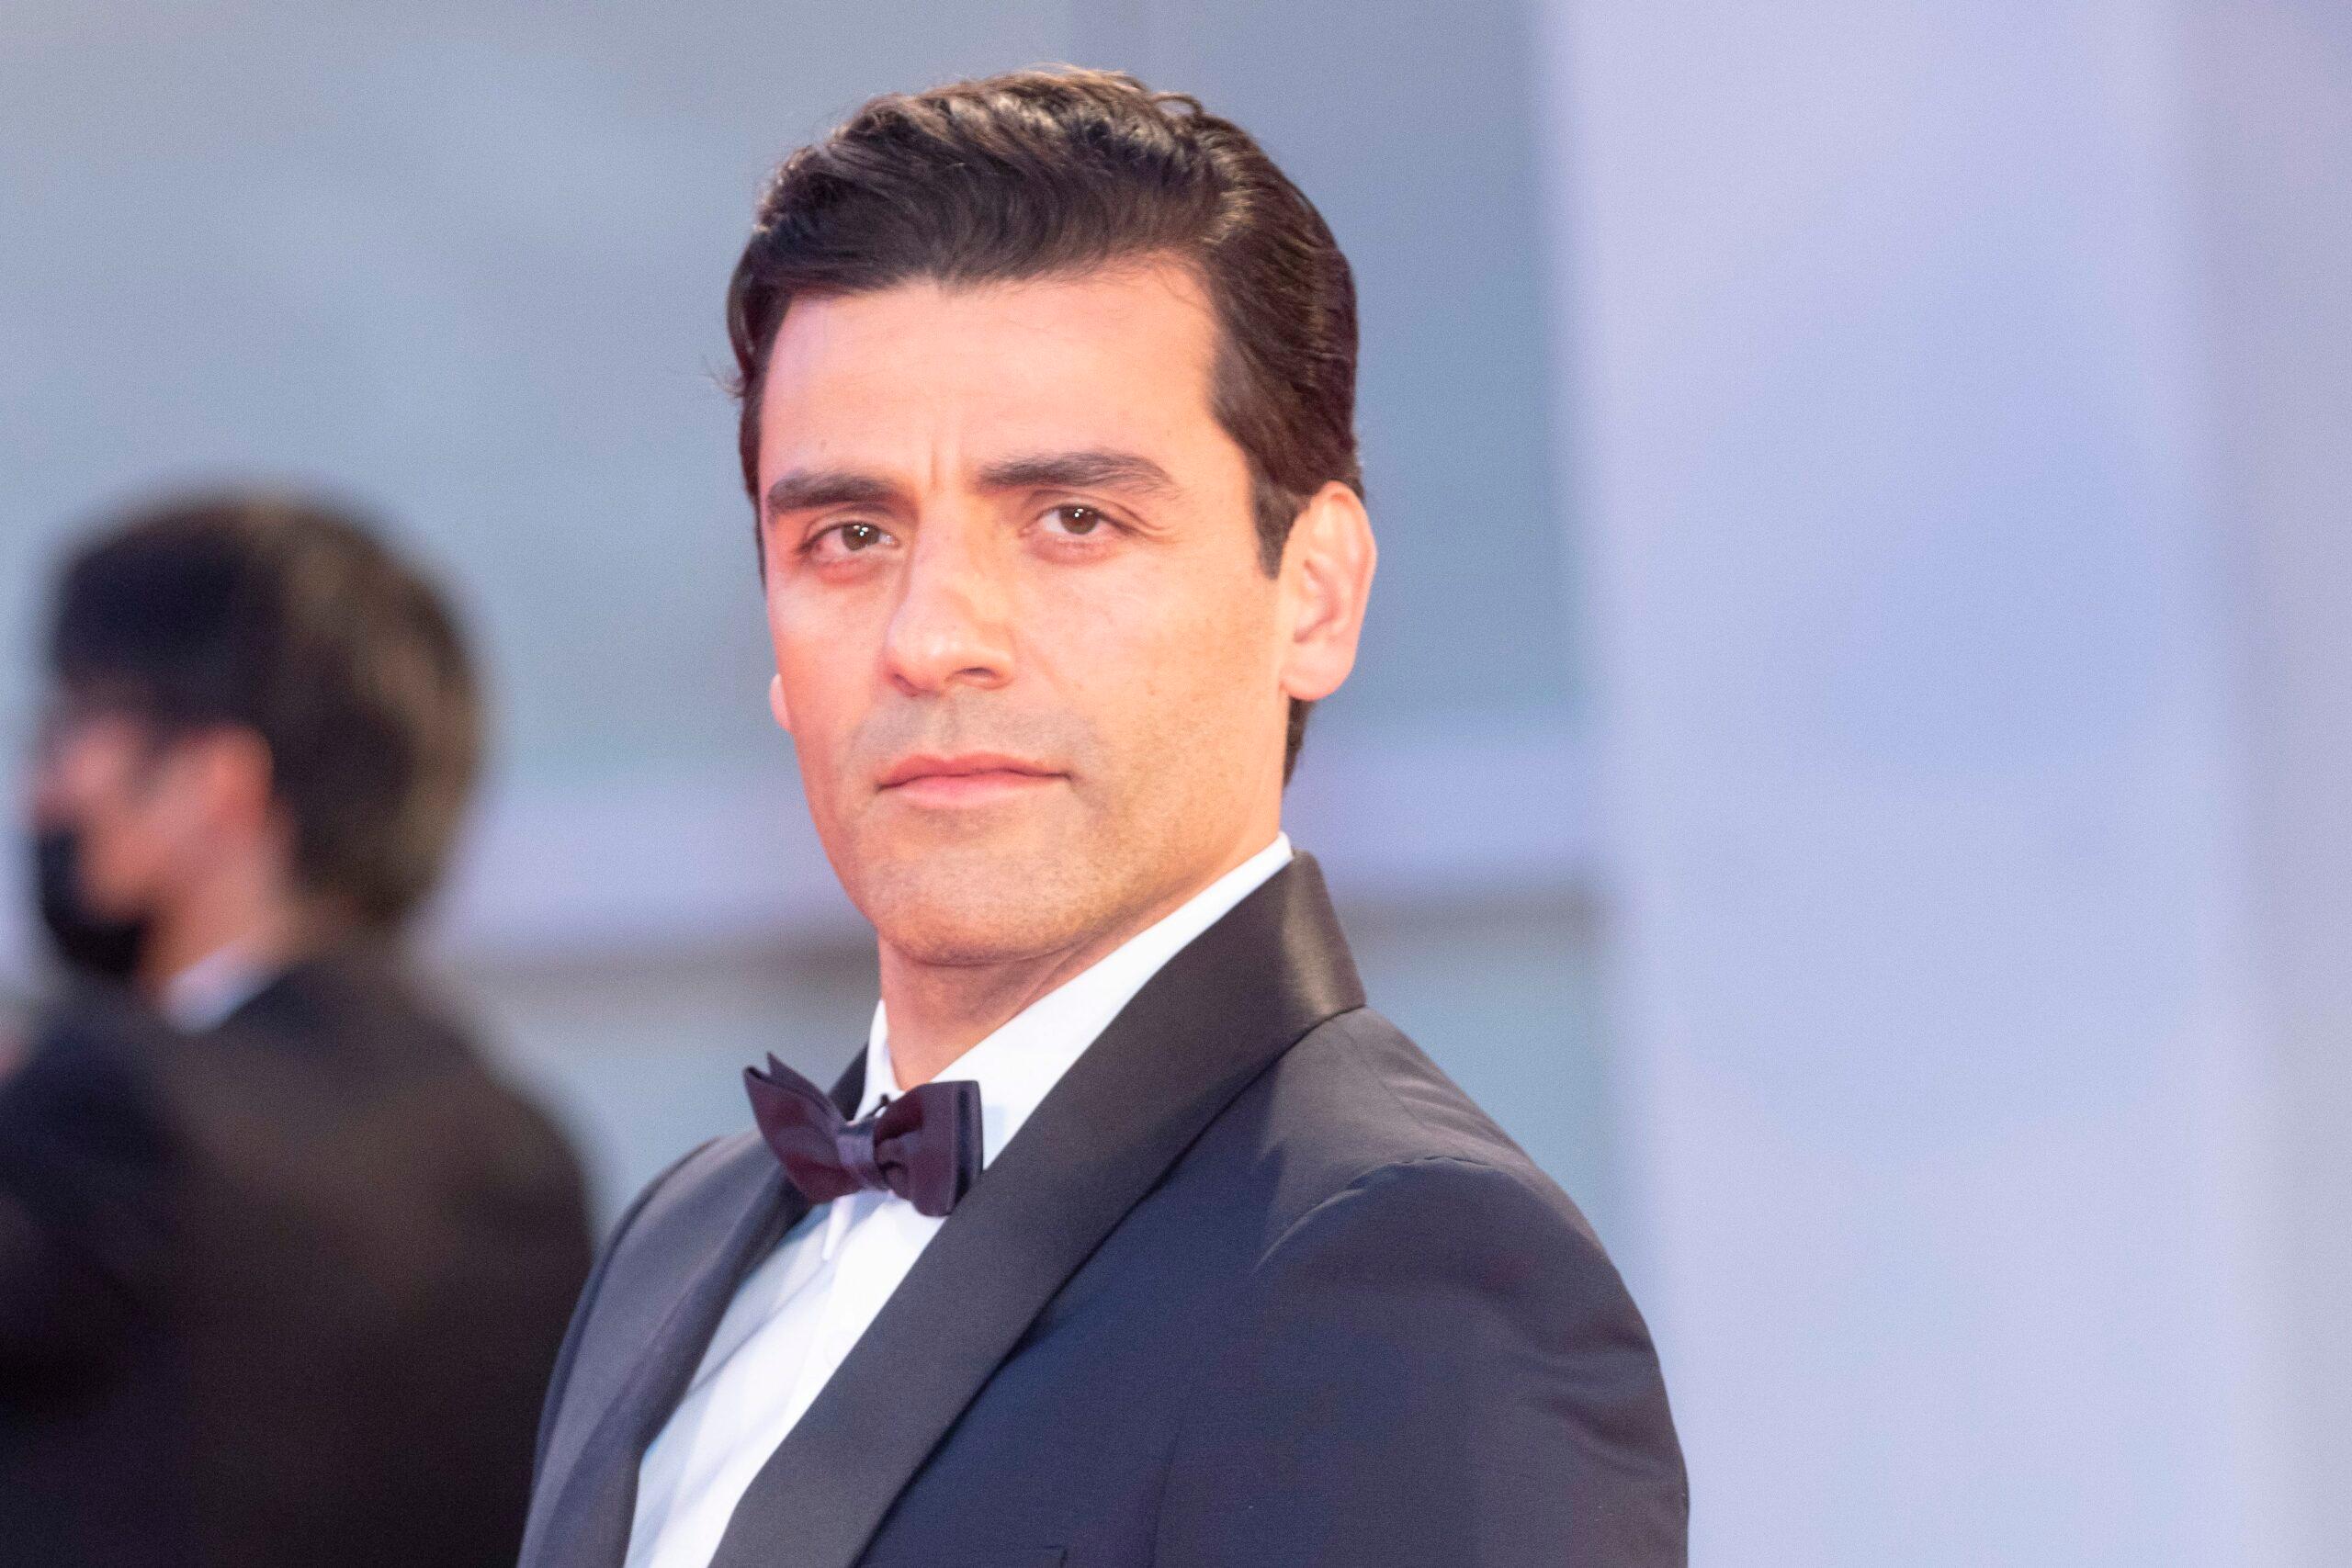 Oscar Isaac at the premiere of 'Scenes From A Marriage (Episodes 1-5)' during the 78th Venice Film Festival at Palazzo del Casino on the Lido in Venice, Italy